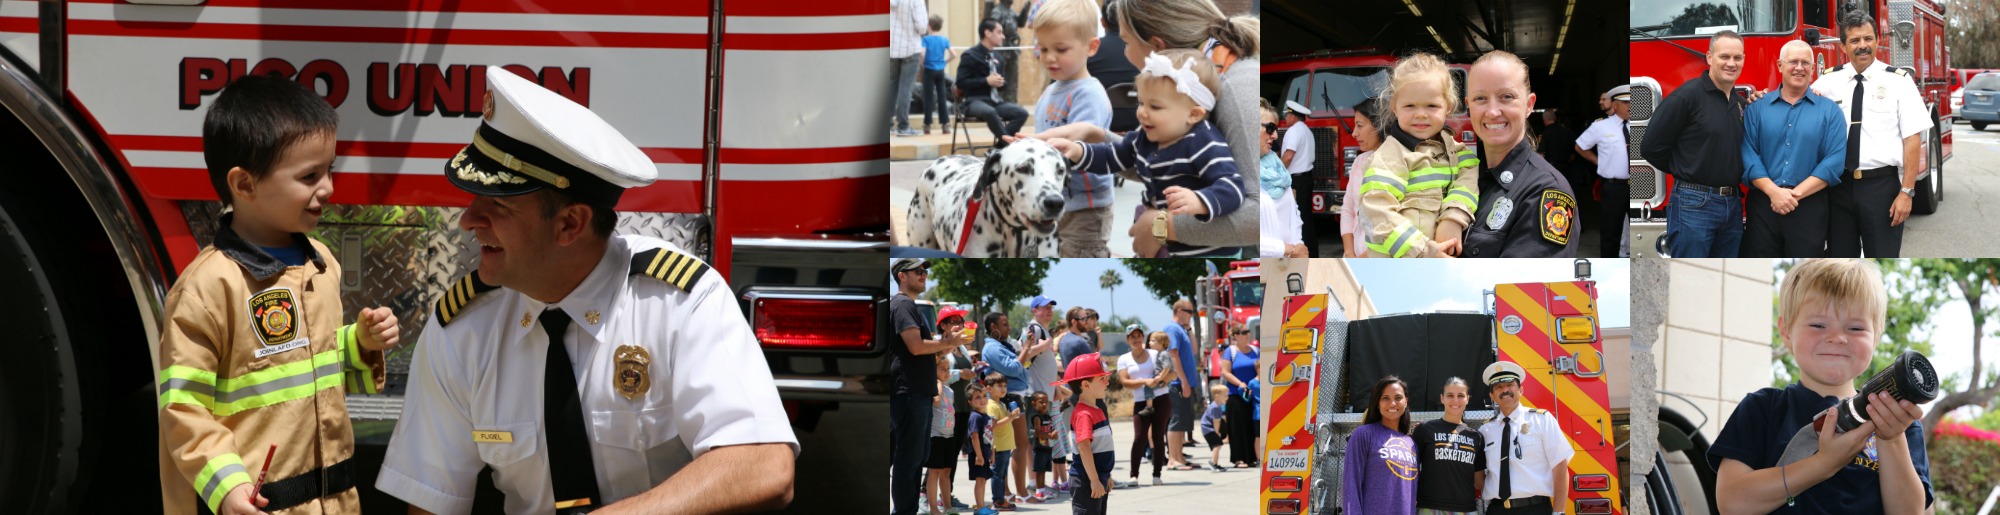 Fire Service Day offered kids of all ages the chance to see their fire department up close and personal.